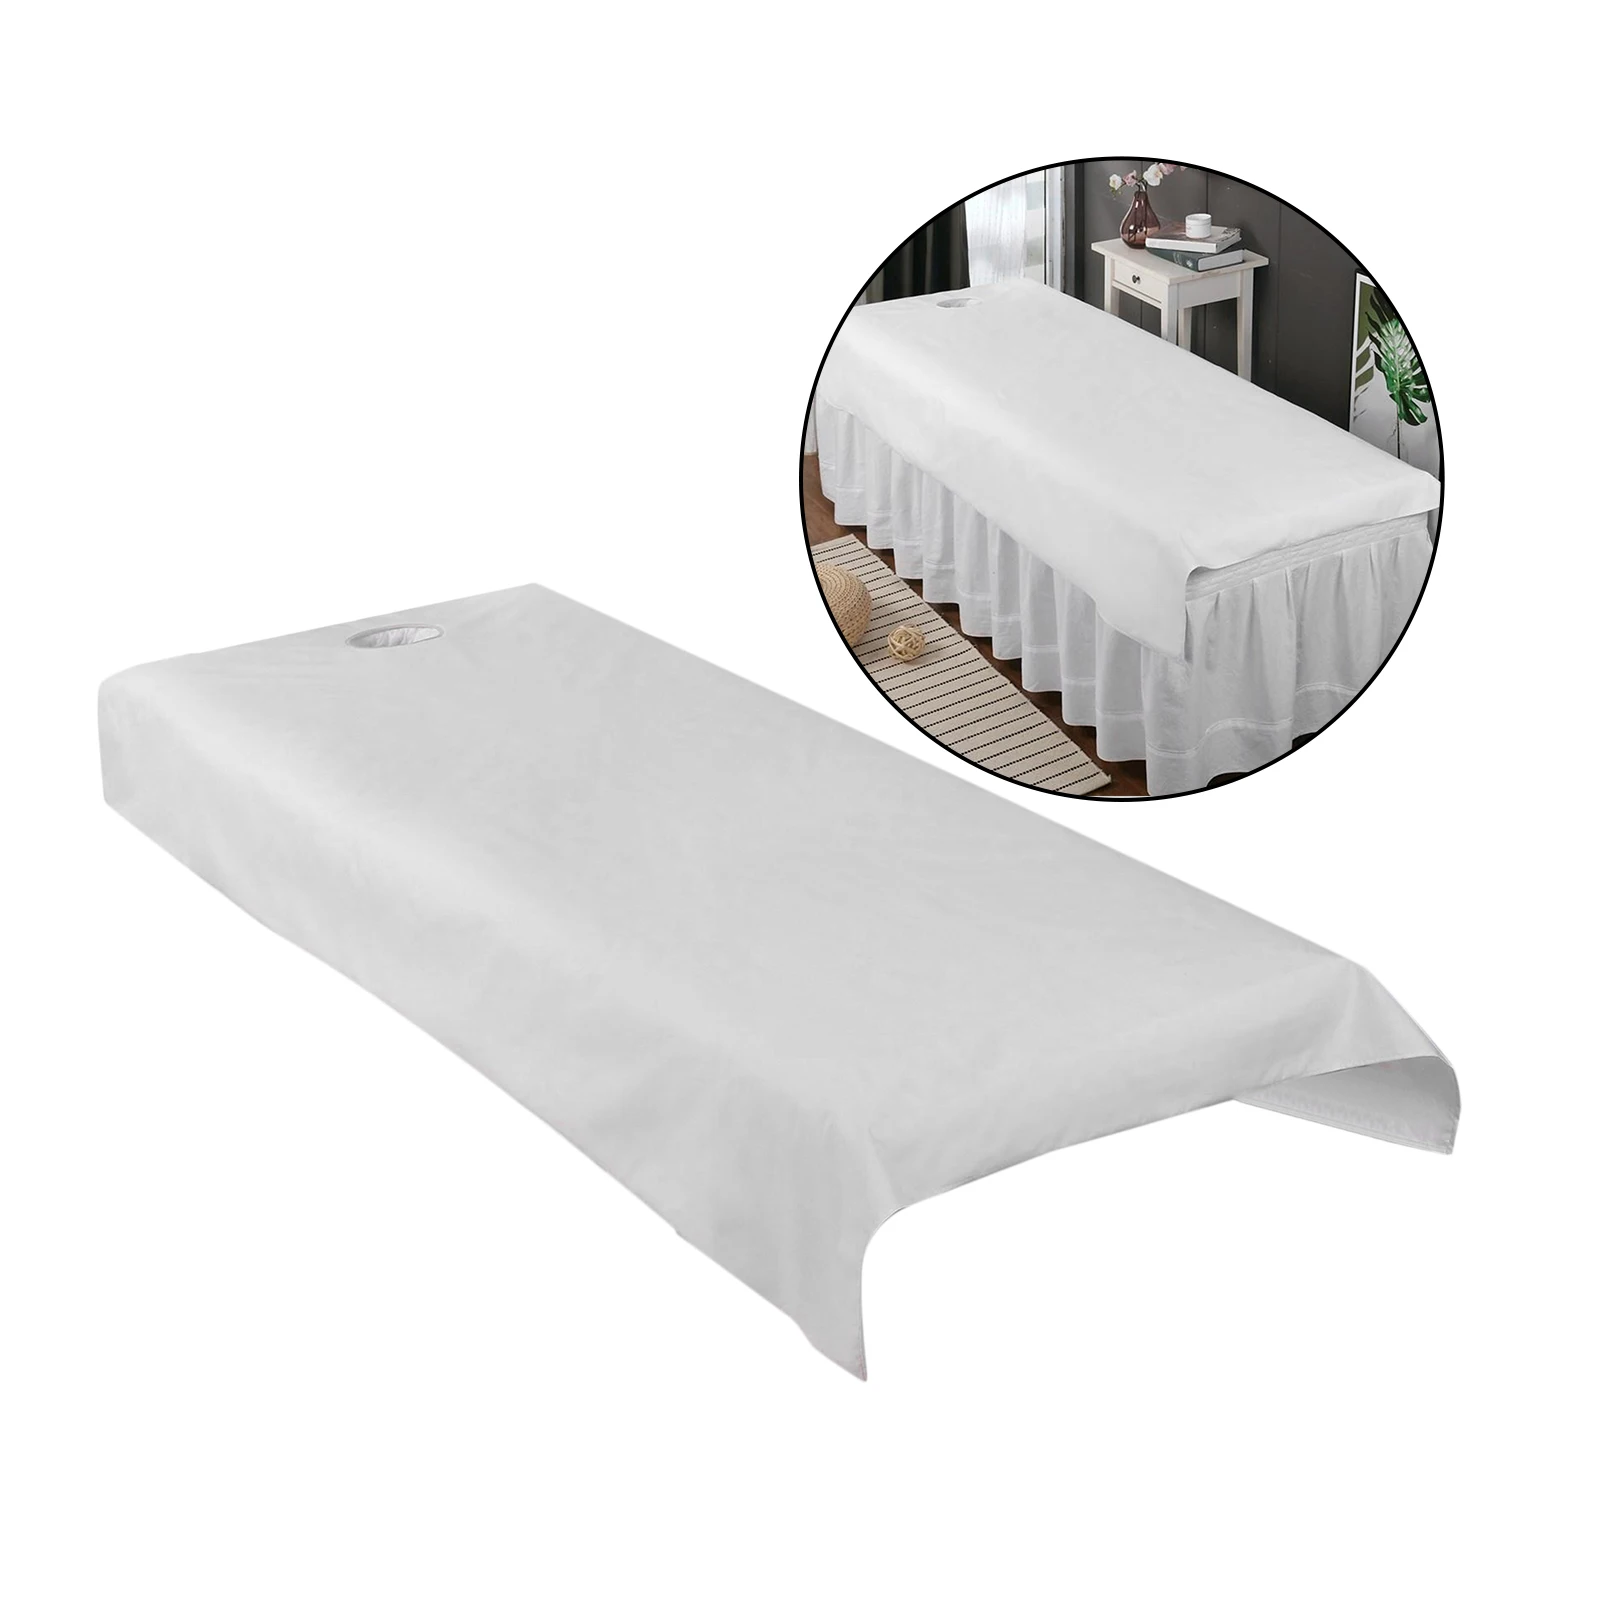 Beauty Massage Bed Sheets with Hole, Waterproof and Anti-oil Soft Salon Spa Bed Cover Protector